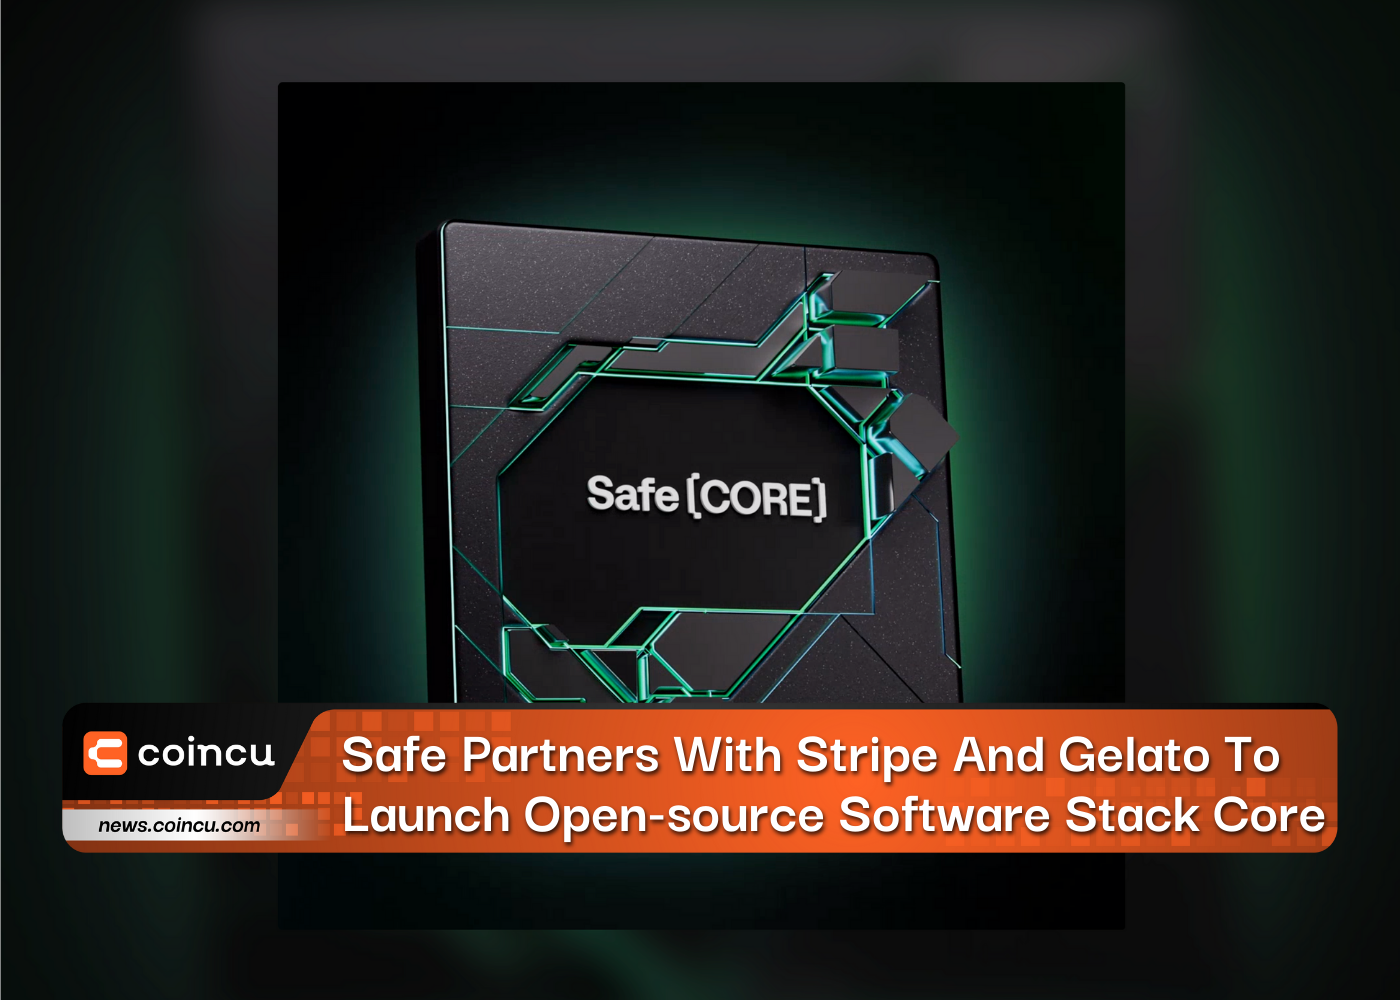 Safe Partners With Stripe And Gelato To Launch Open-source Software Stack Core